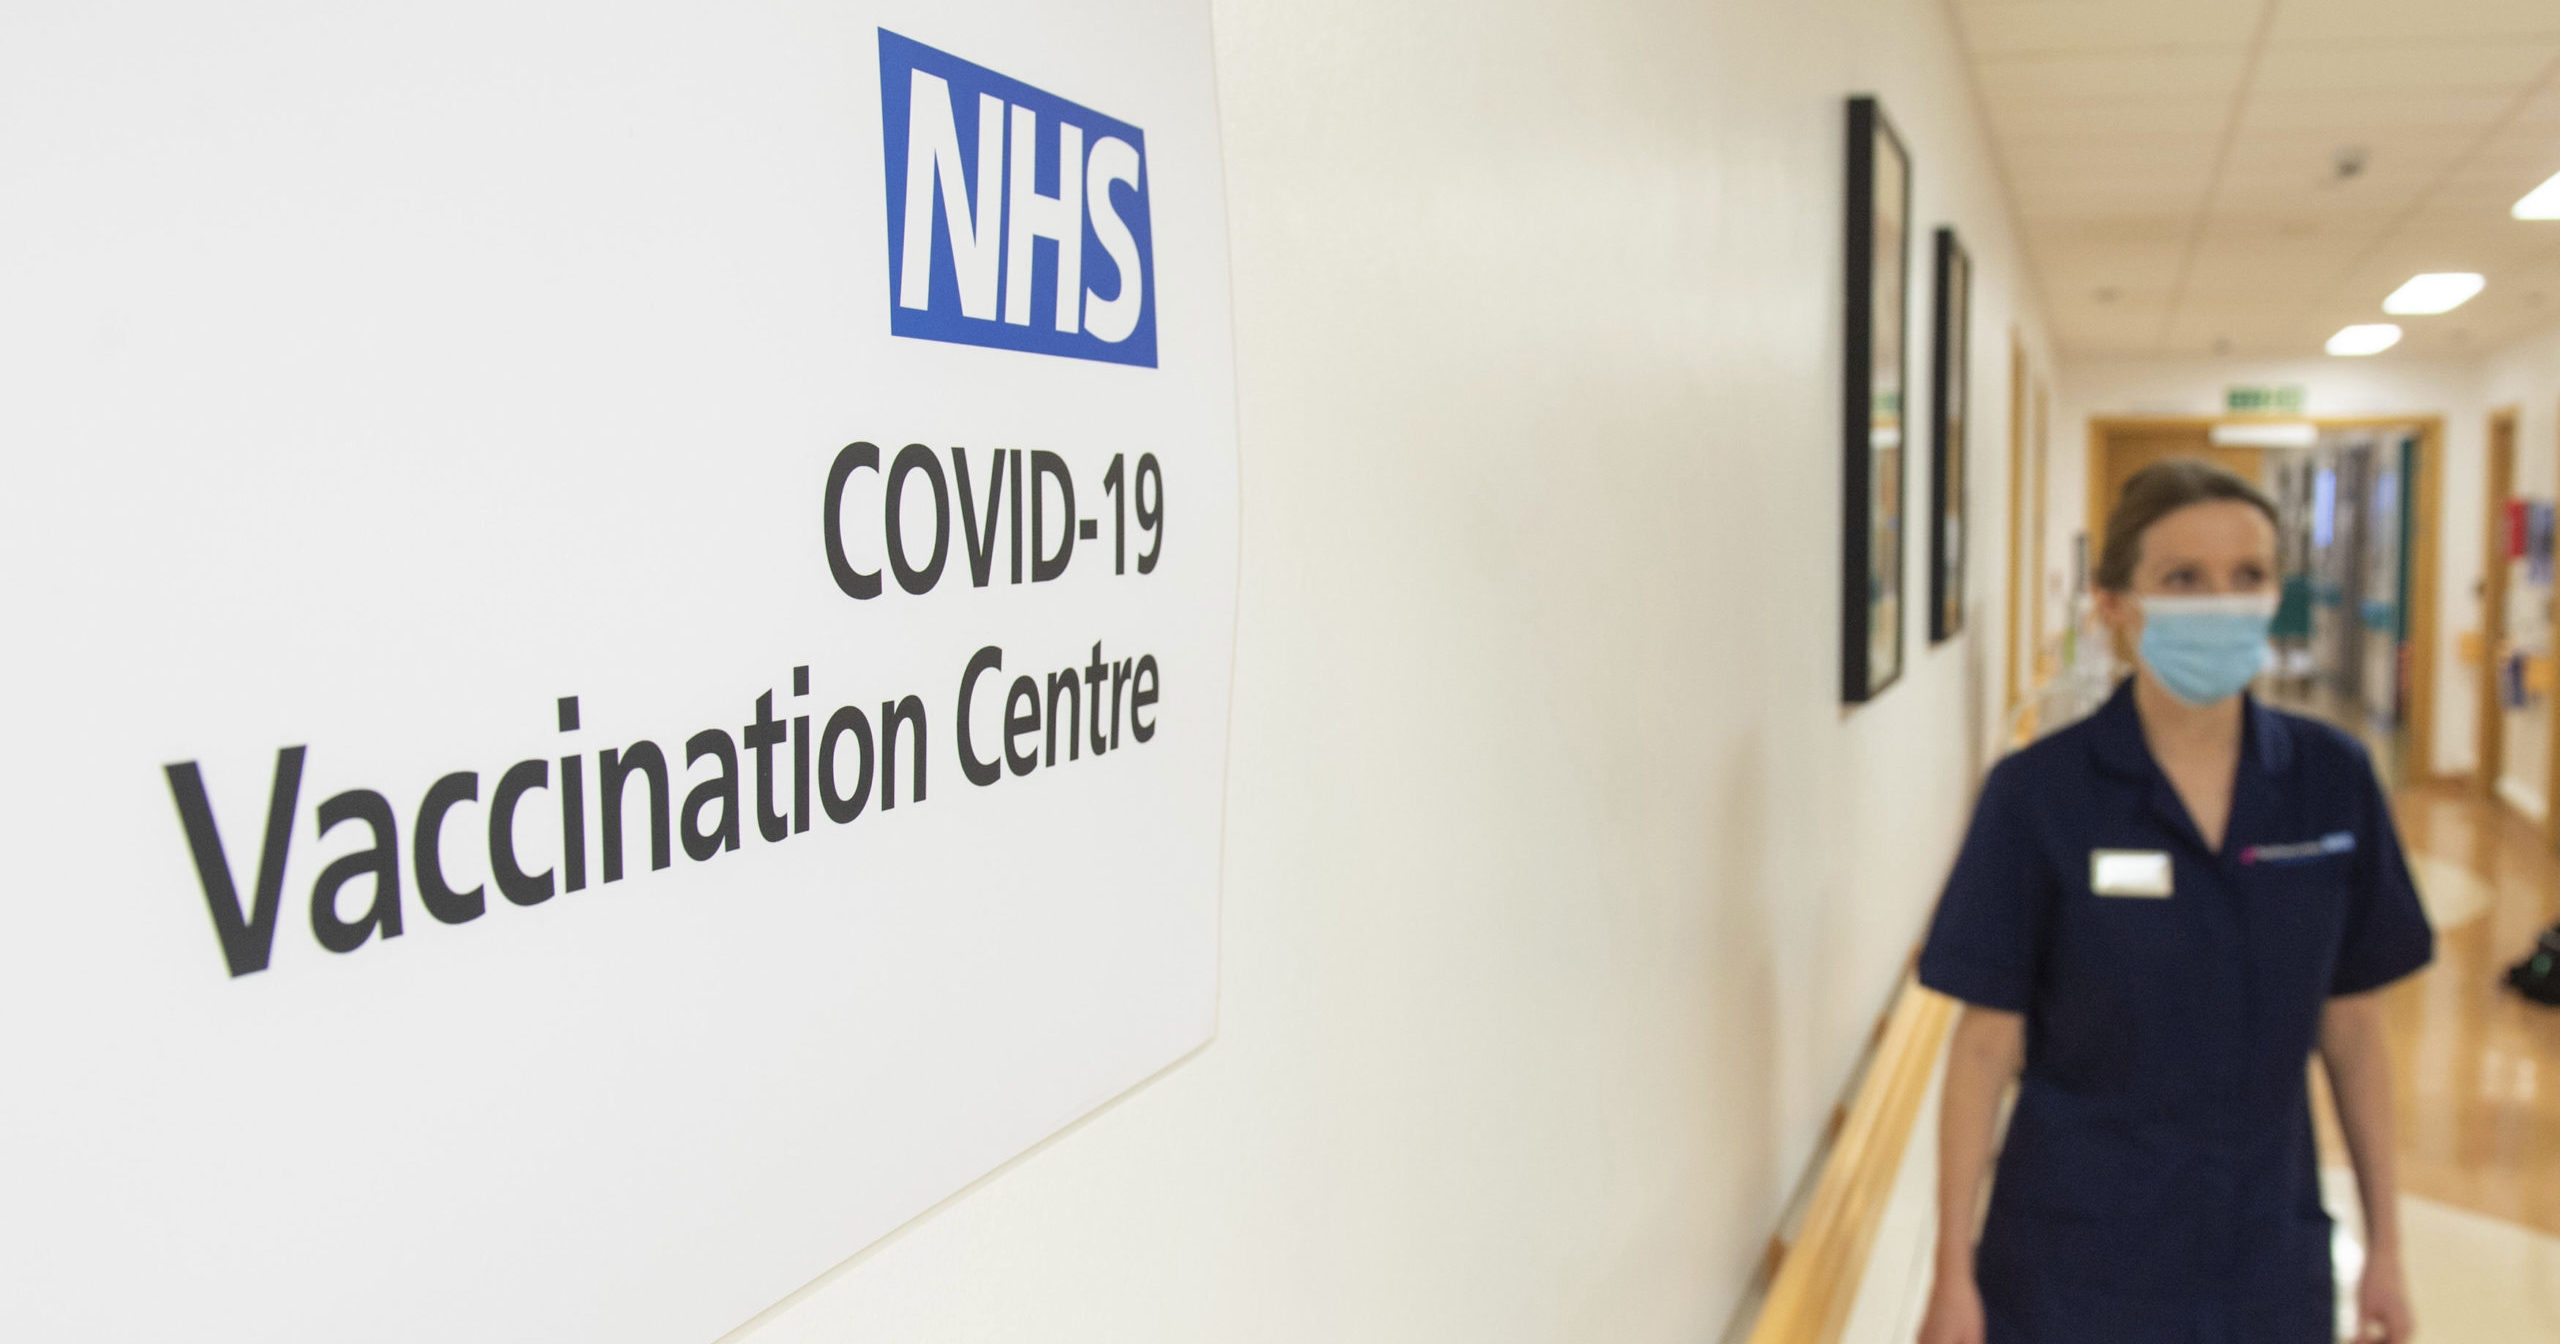 Signs for the COVID-19 Vaccination Centre are seen at the Royal Free Hospital in London on Dec. 7, 2020.